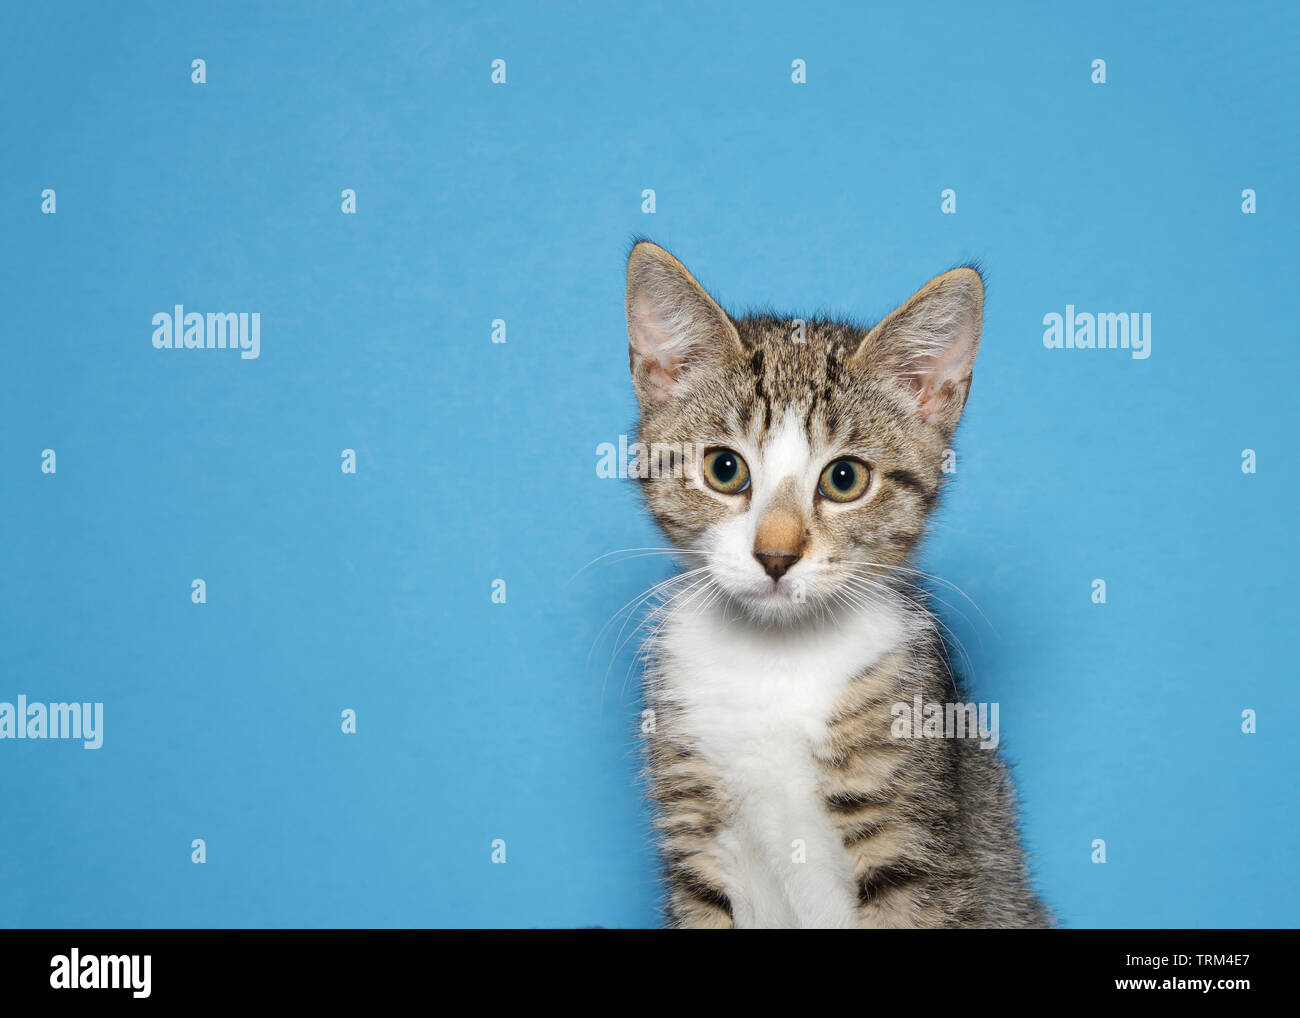 Portrait of a black tan and white tabby kitten looking at viewer, blue background with copy space. Stock Photo